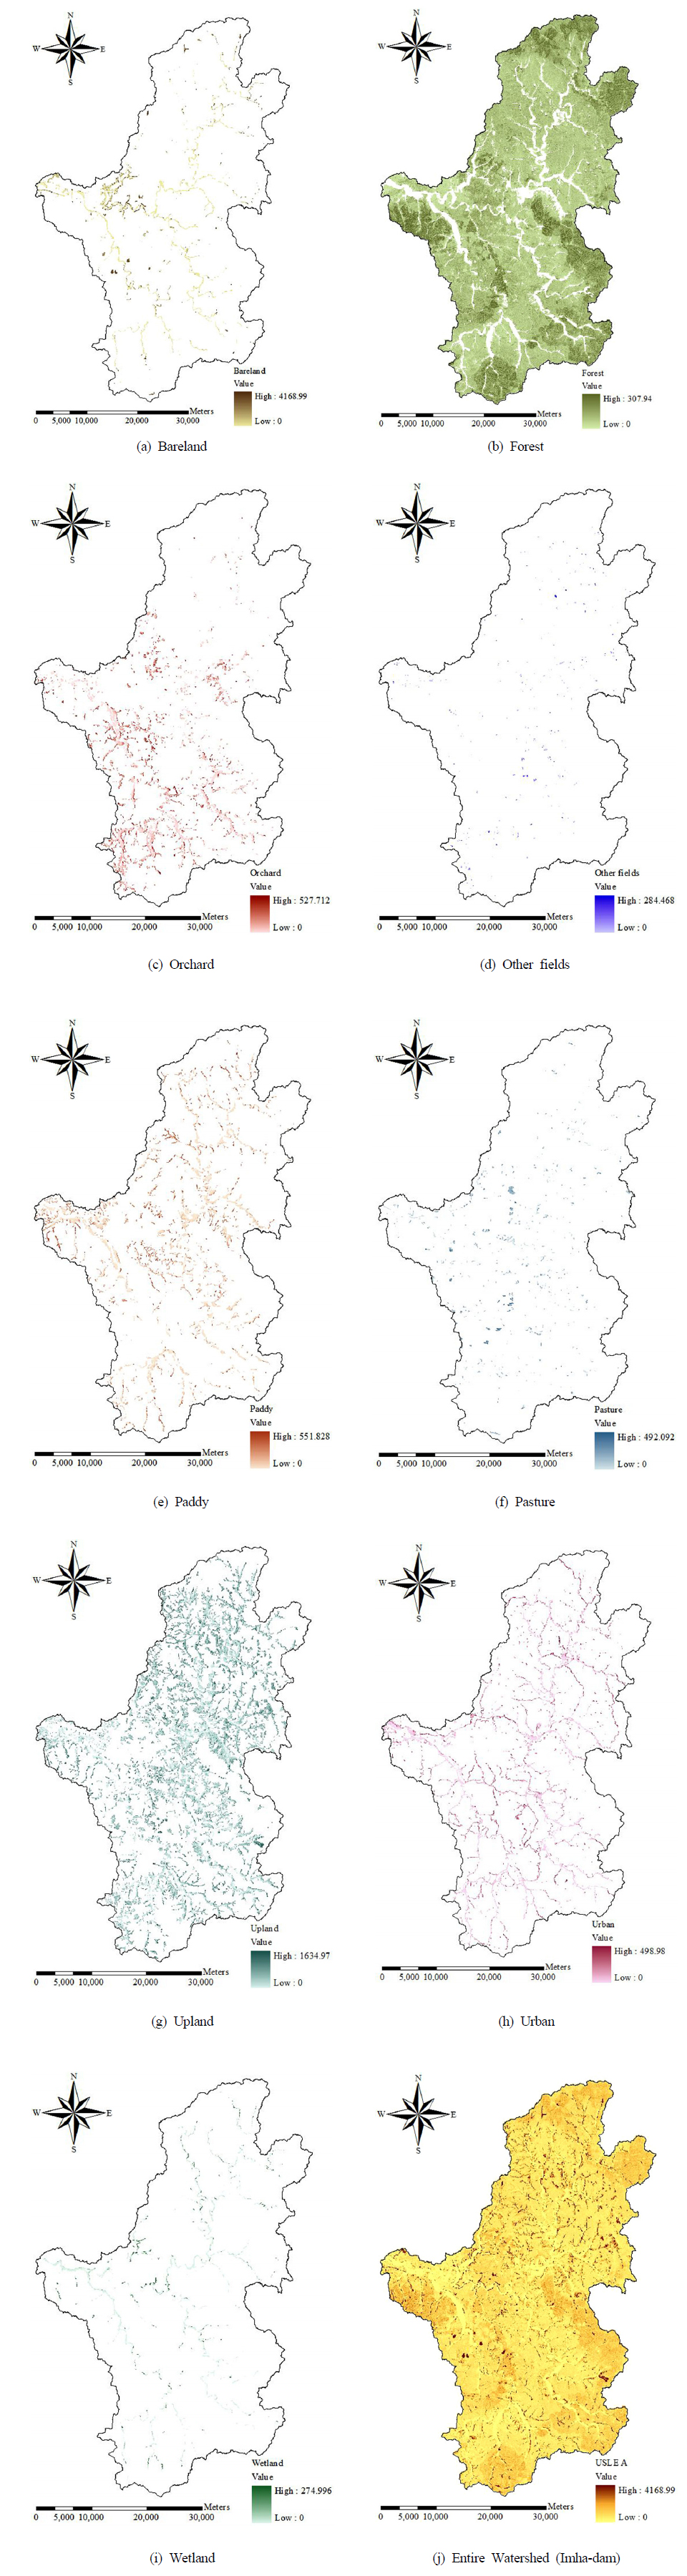 Spatial distribution of the estimated soil erosion by land uses (ton/ha/year).